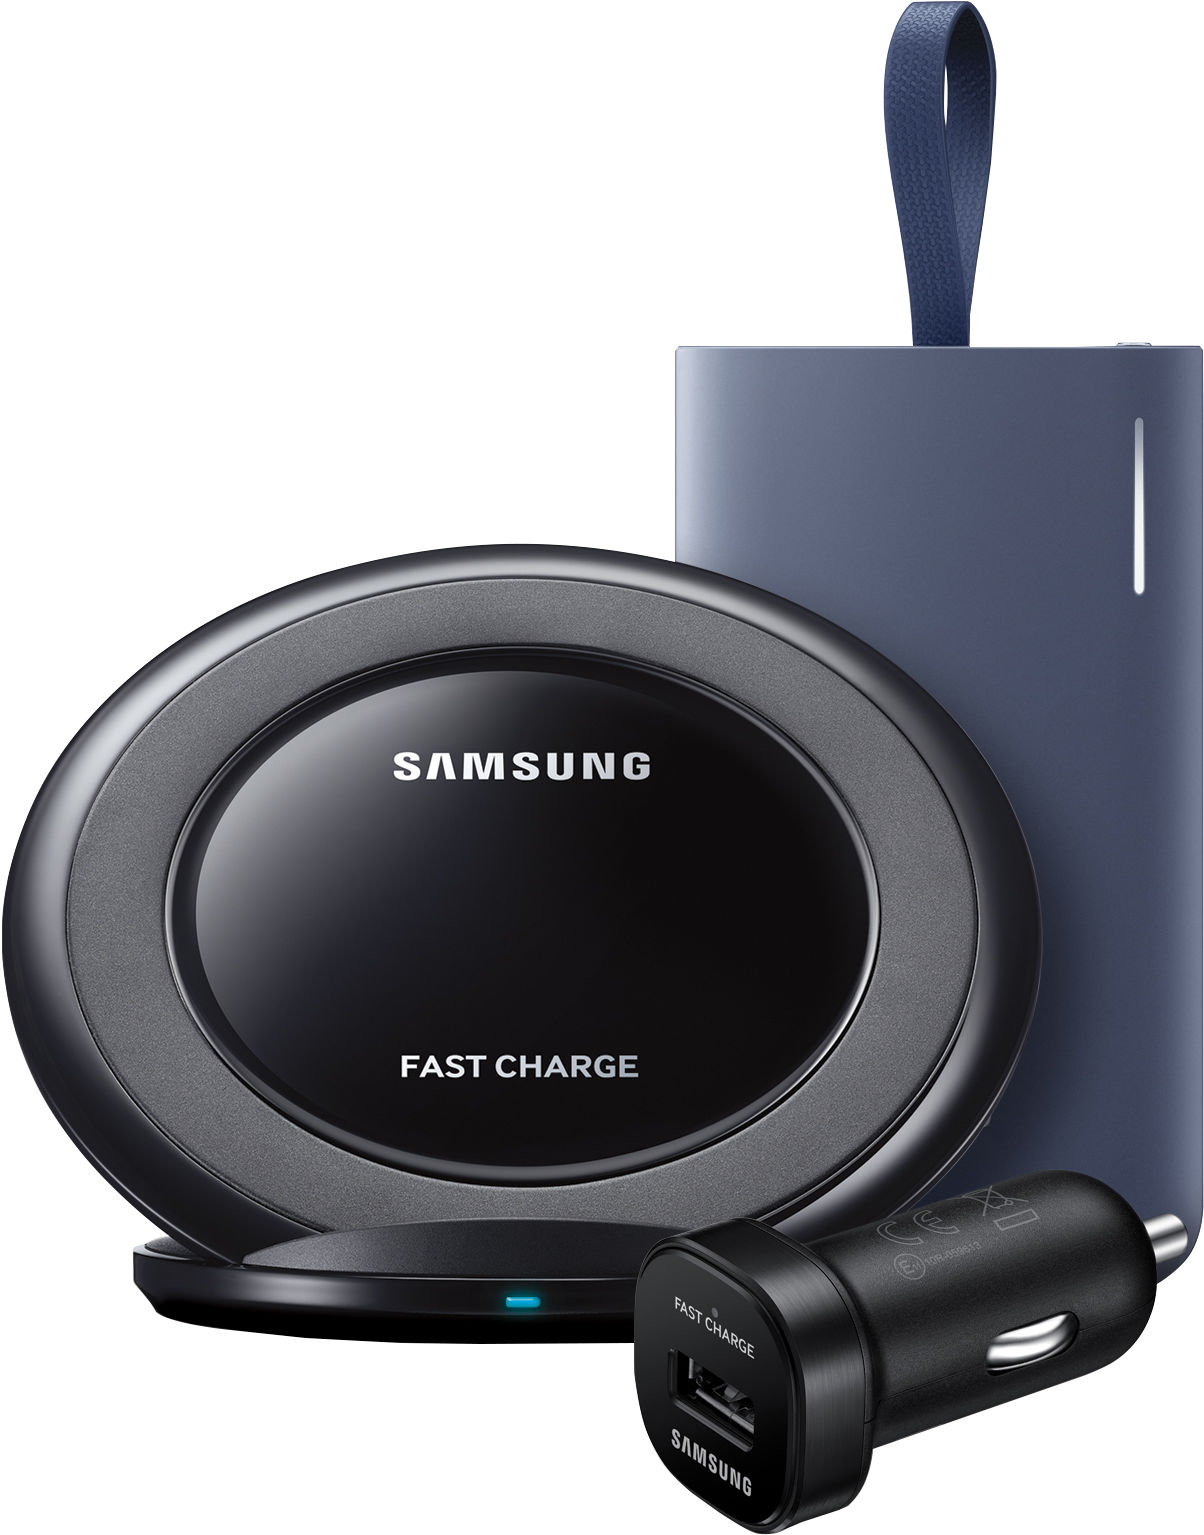 Samsung fast charge. Самсунг fast charge. Wireless Charging Samsung Case. Stand Samsung. Фаст чардж